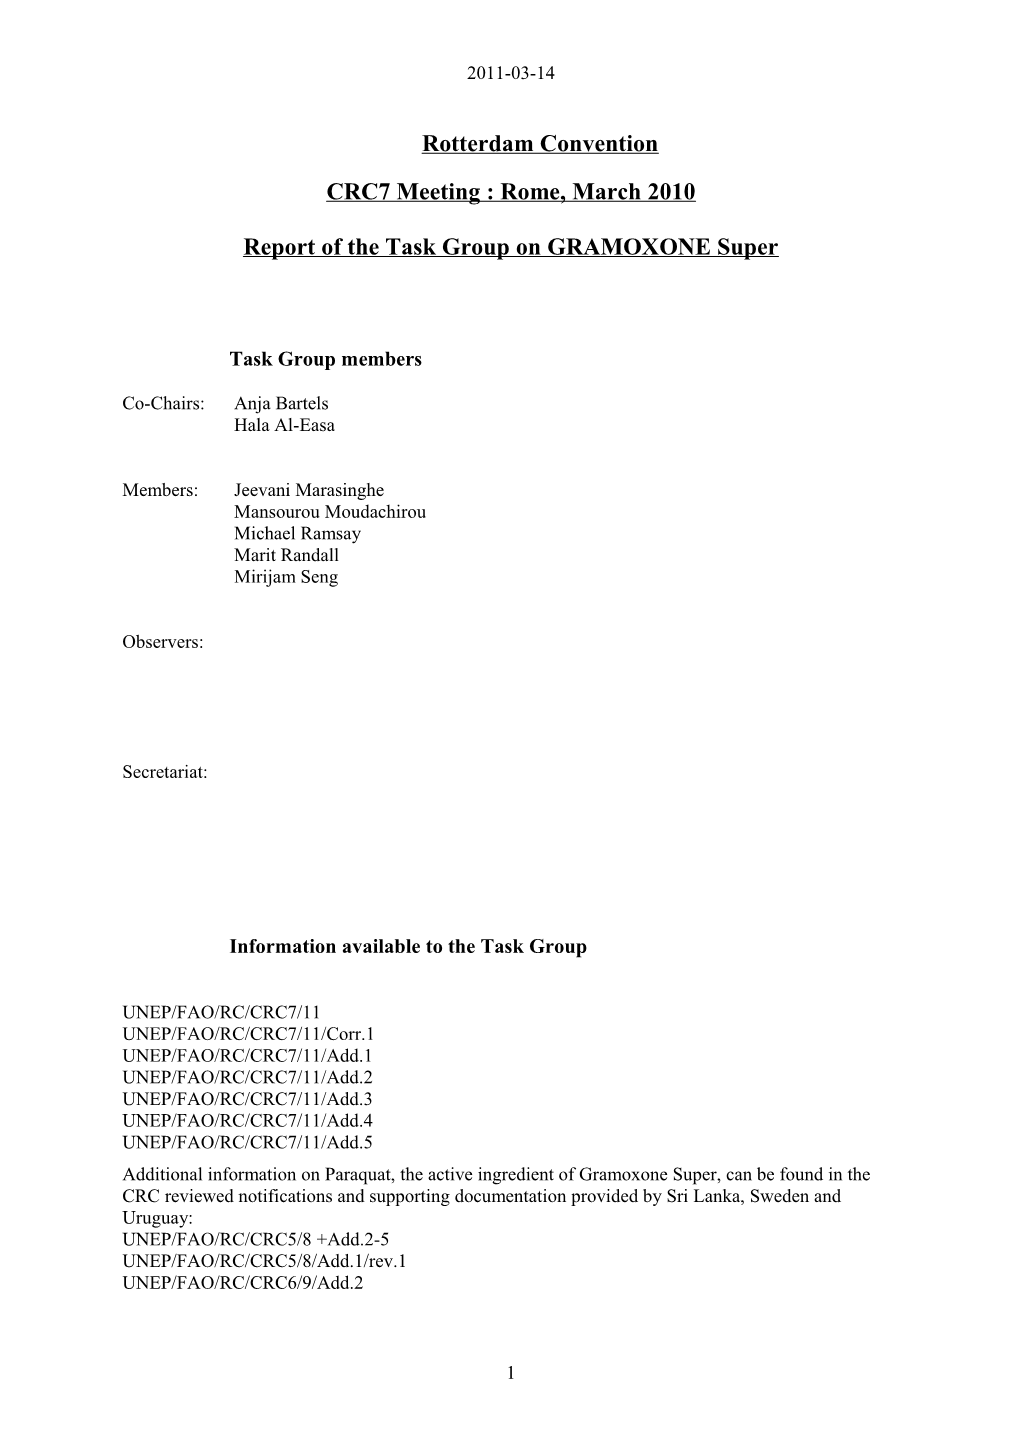 Report of the Task Group on GRAMOXONE Super